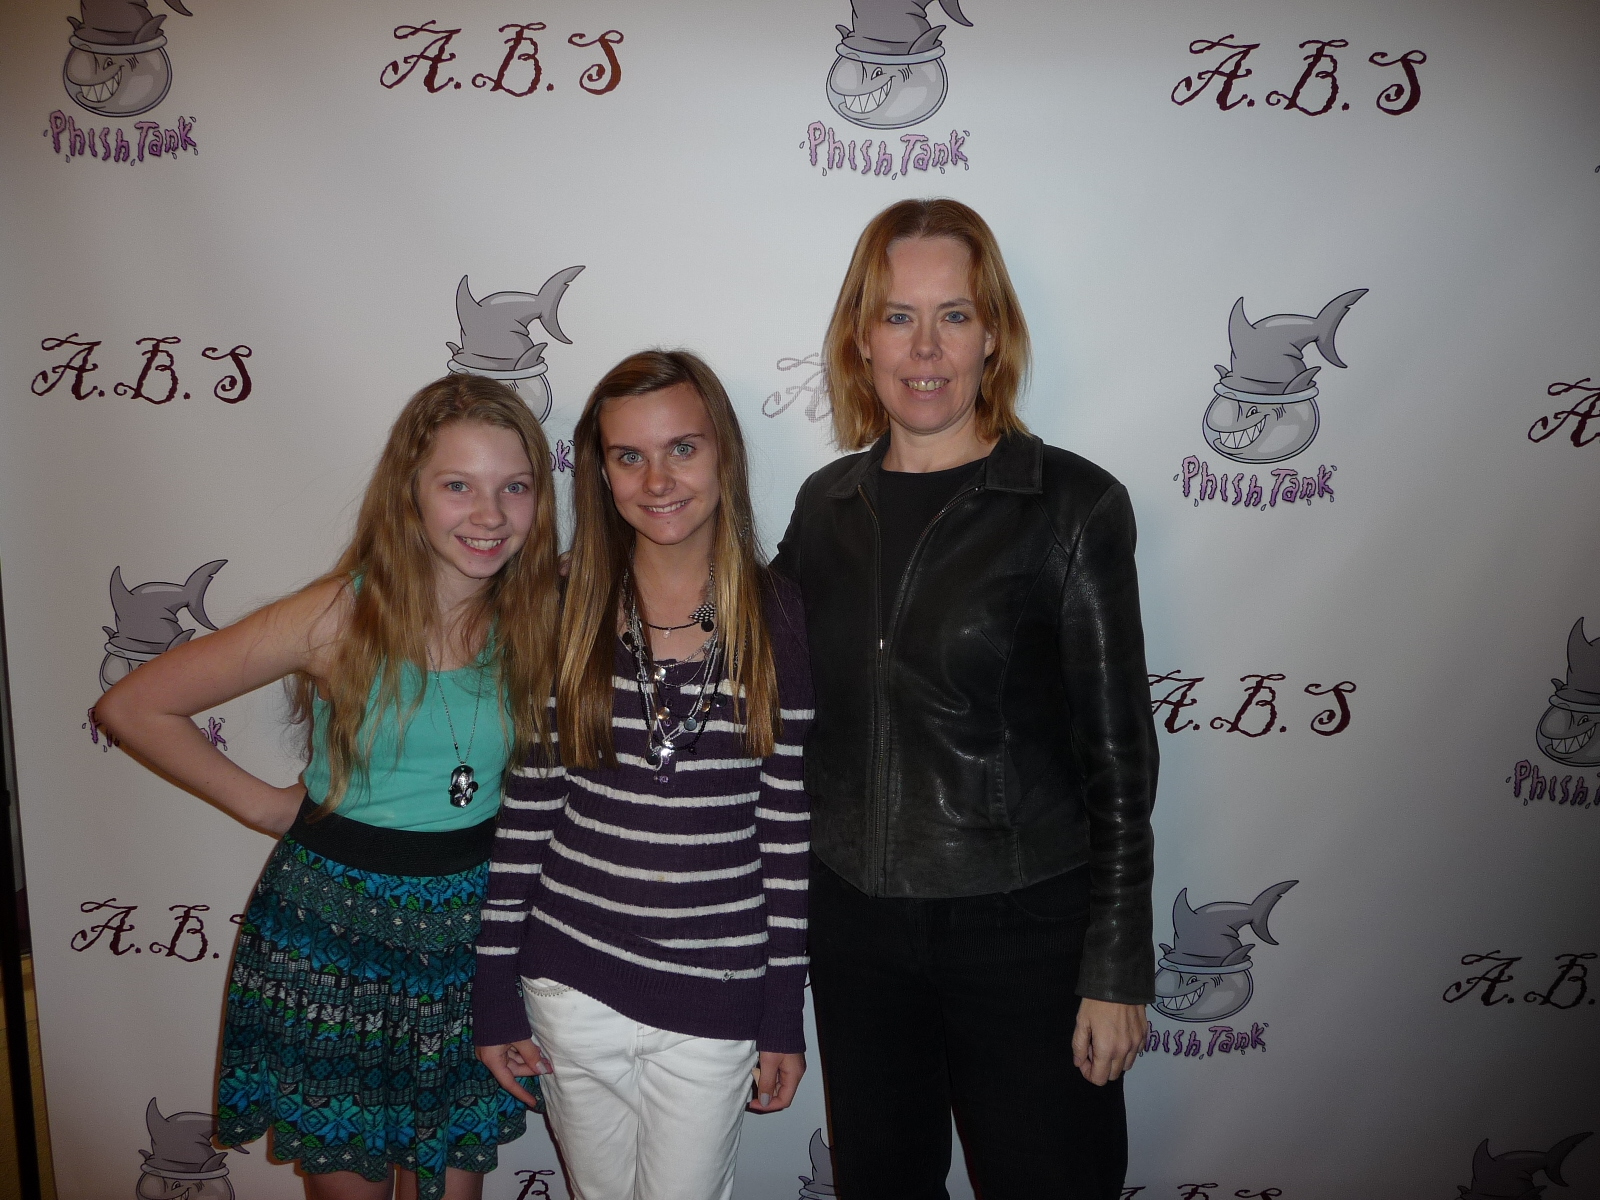 Sierra Willis, Mary Olsen and Elise Luthman at the screening of A.B.S